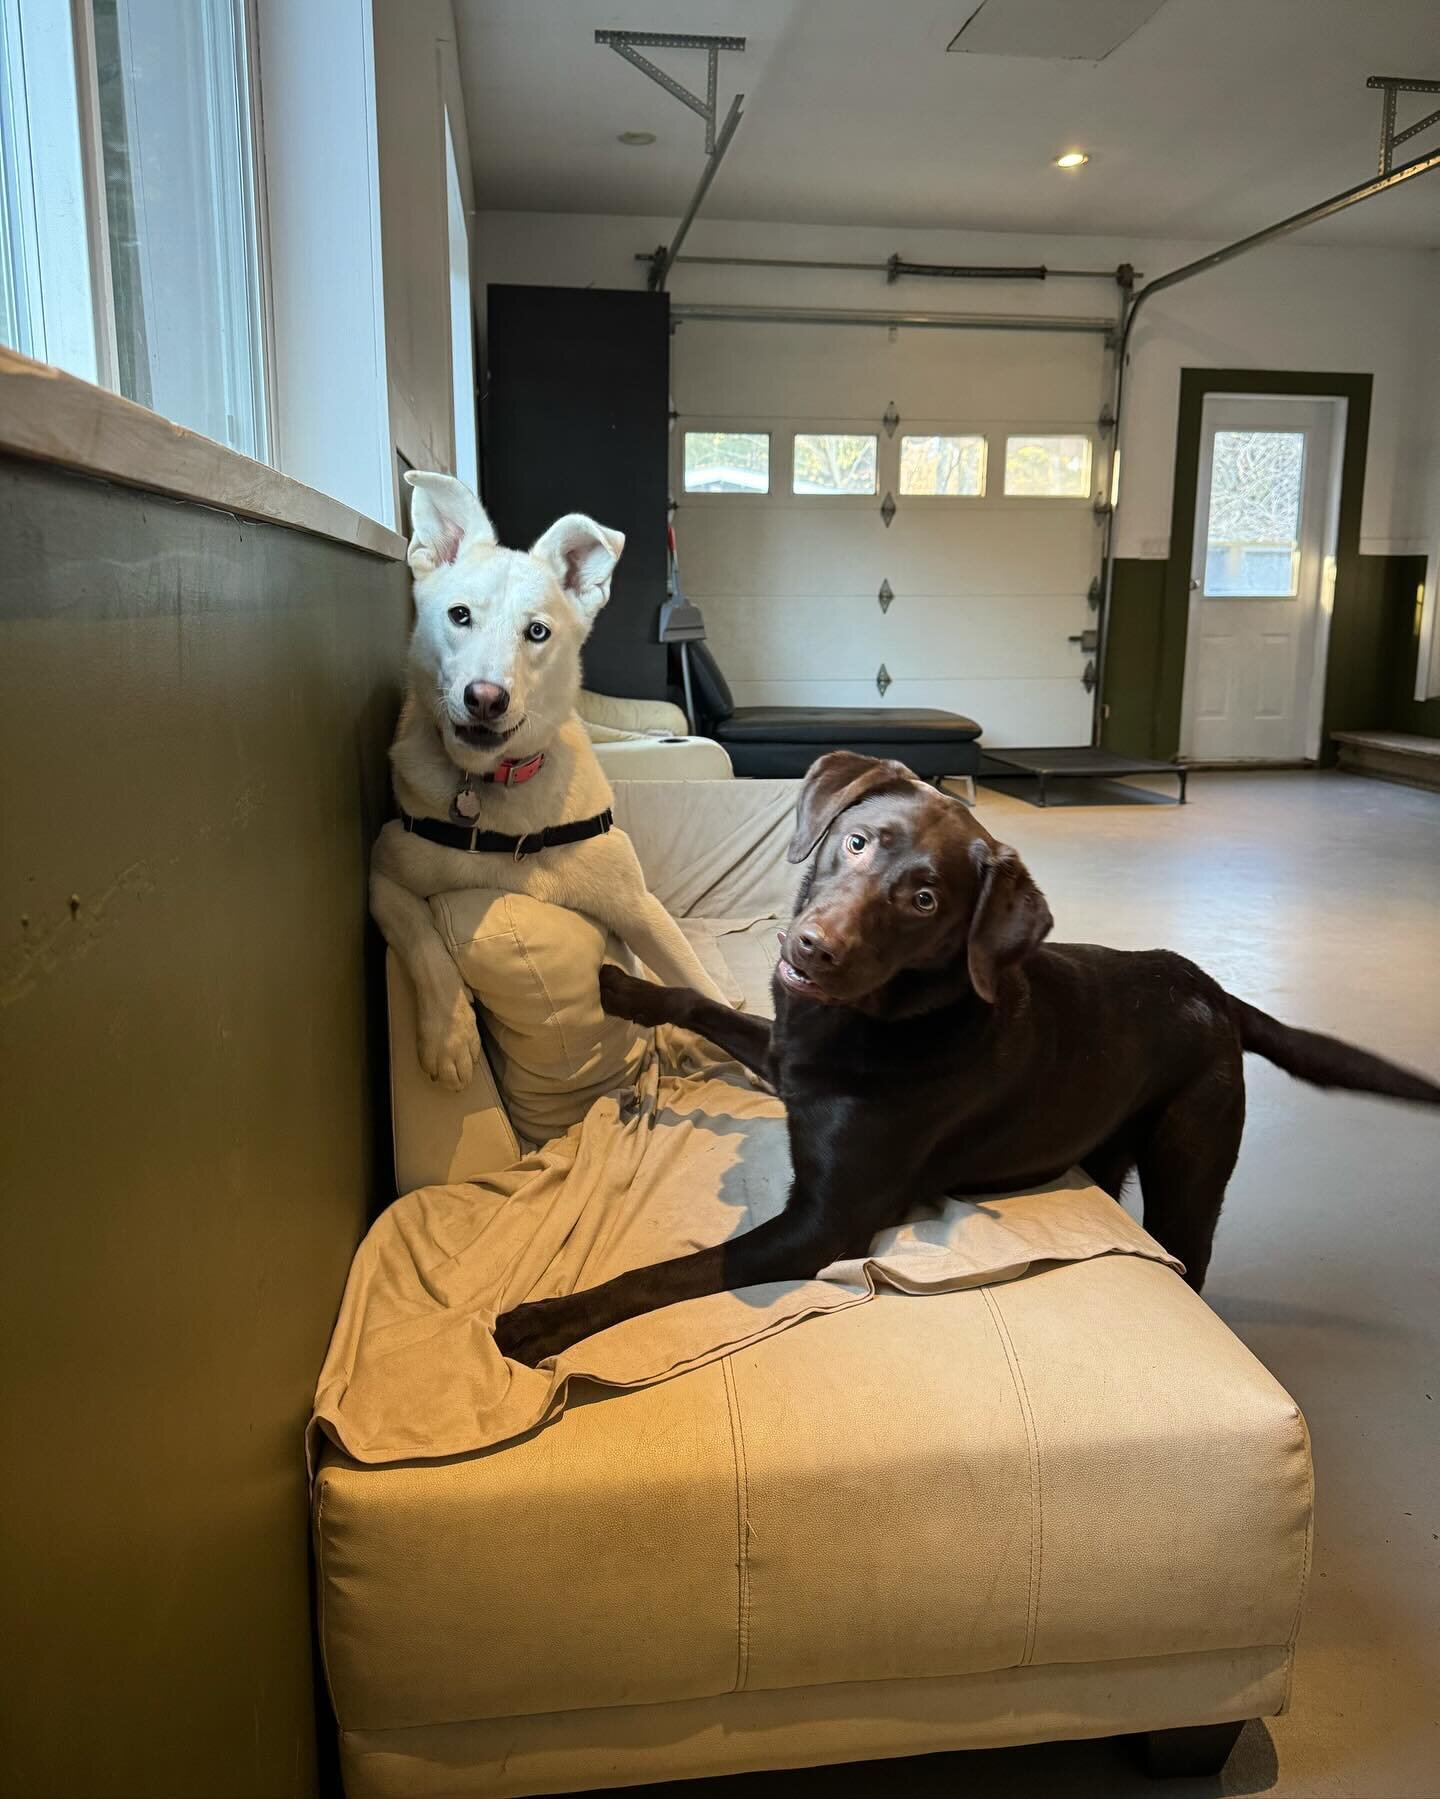 We post many photos of our awesome adventures, but did you know we also have a fantastic facility? Great for a post-hike snooze or supervised socialisation with friends in any weather. From sofas by the fireplace to a vast sand pit and agility yard, 